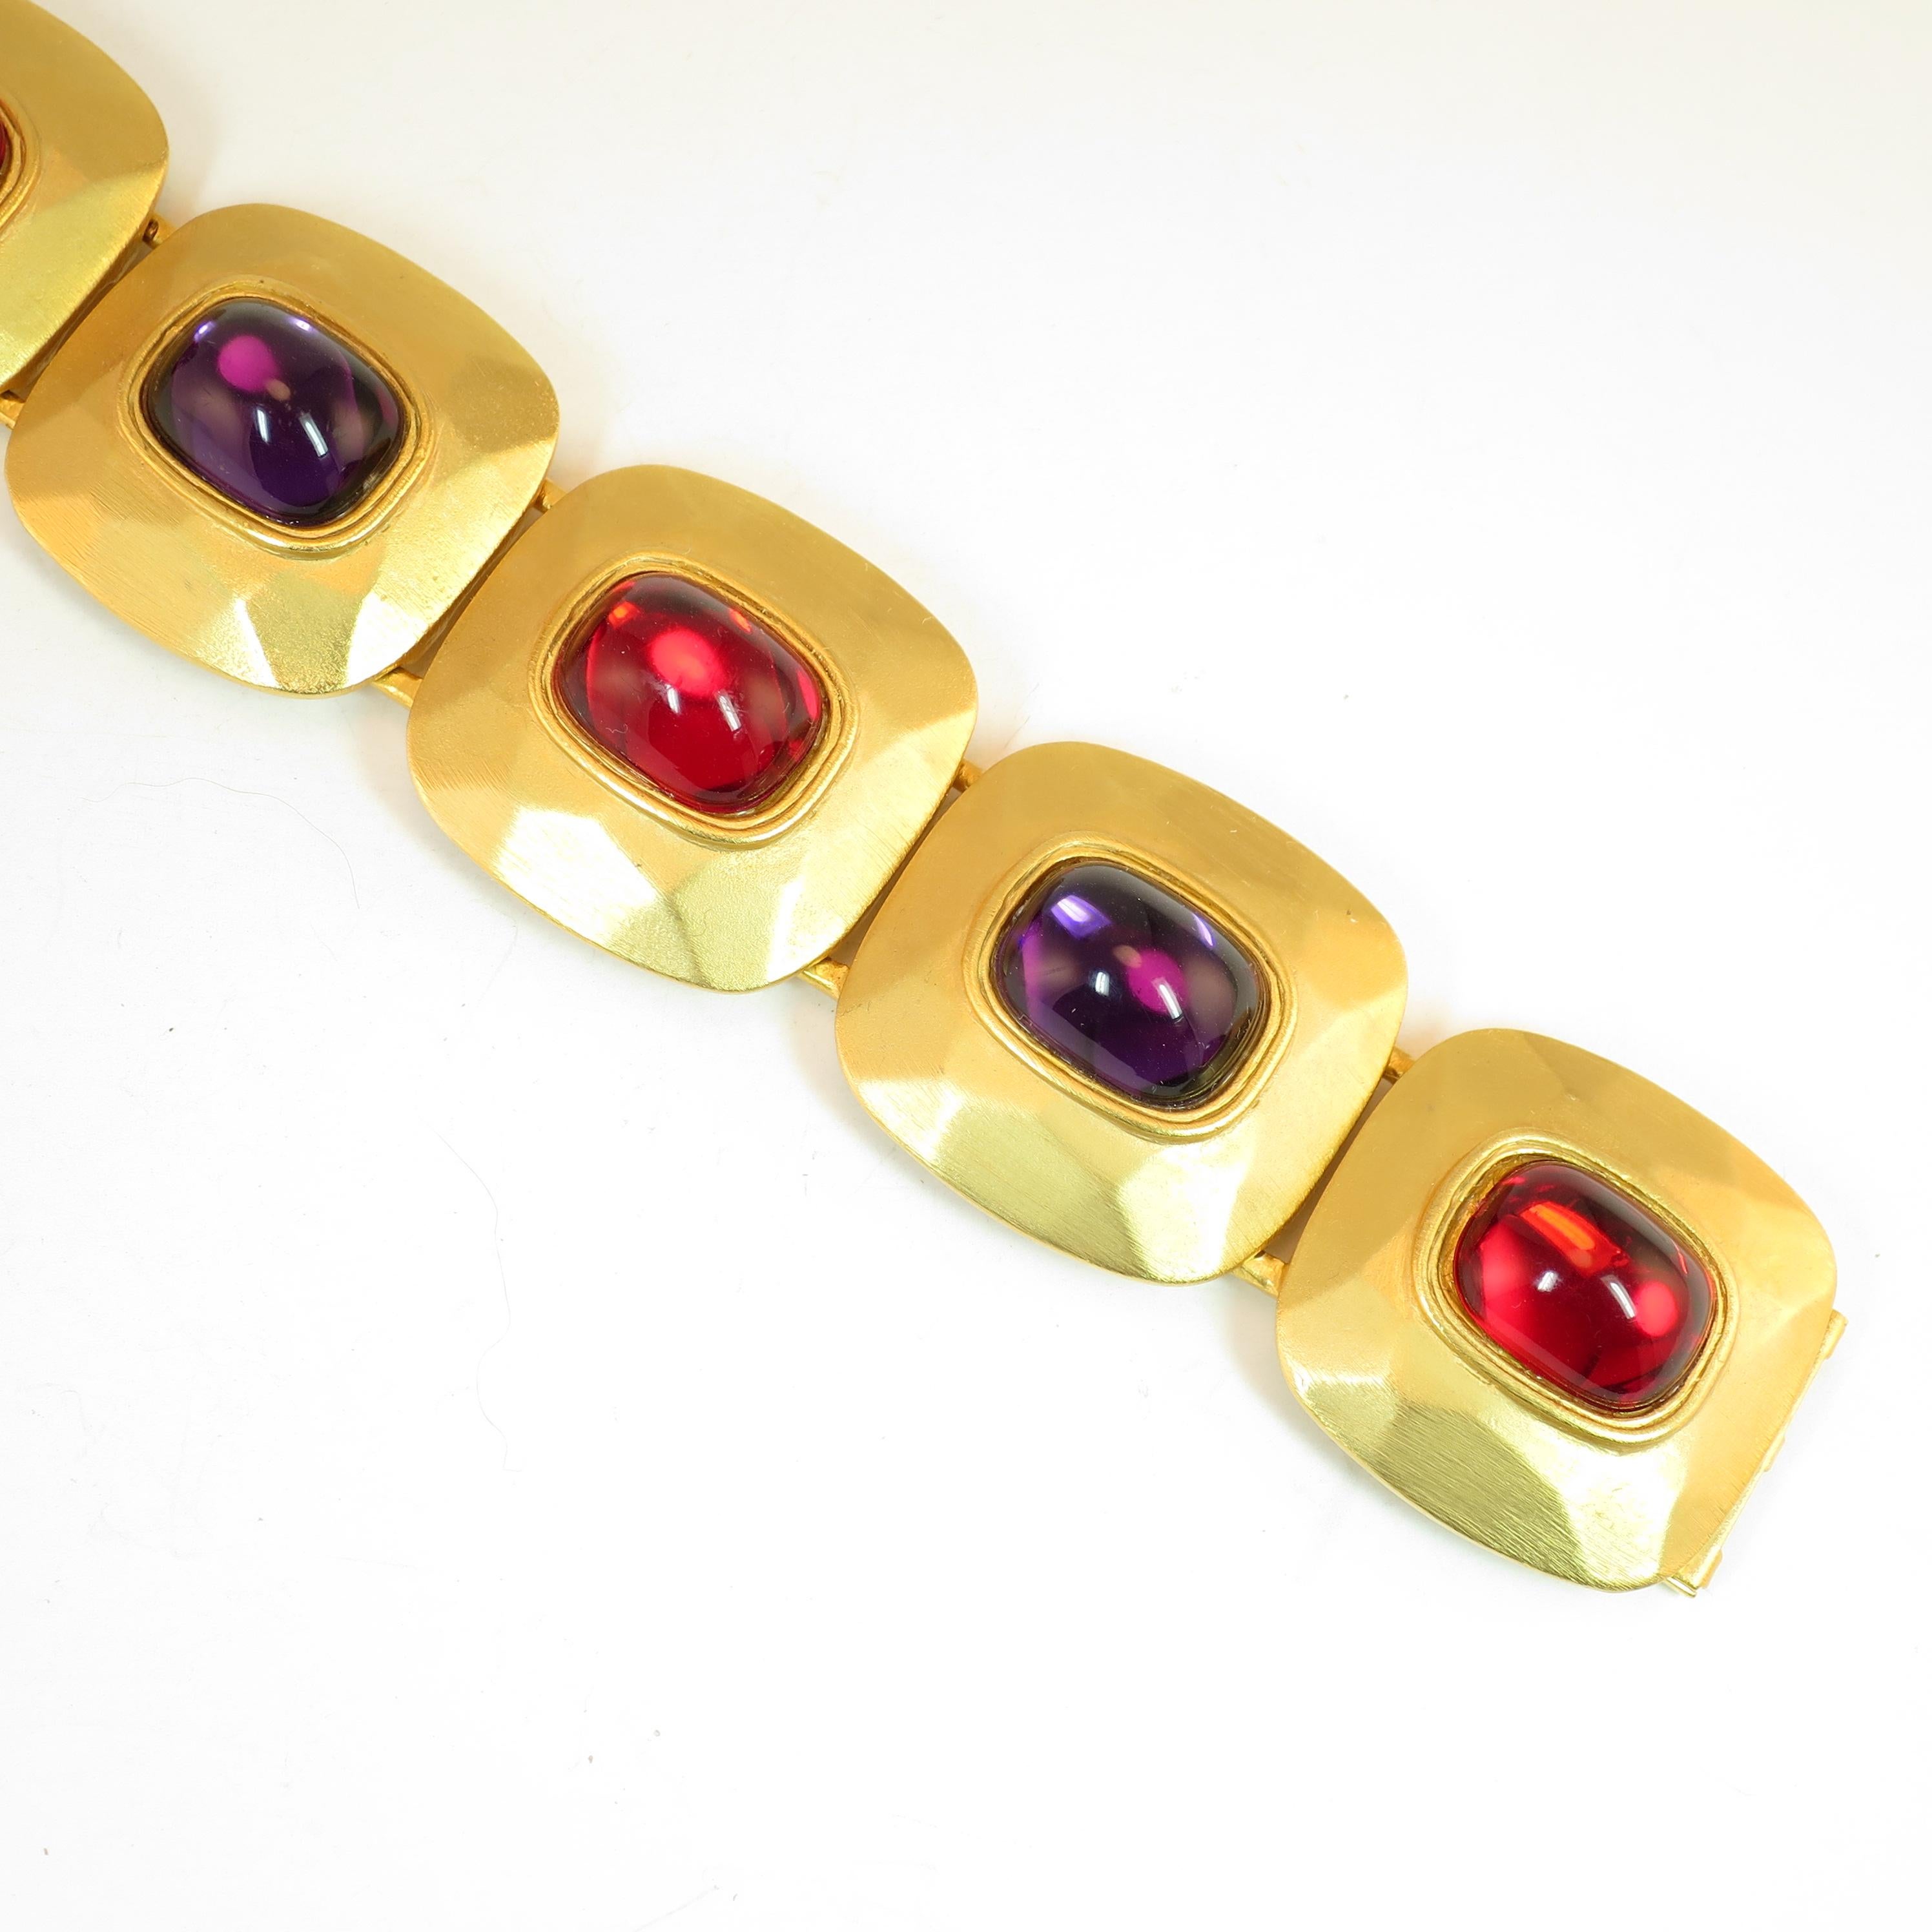 Mid-Century Gem-Craft Hammered Gold Jewel-Tone Day & Evening Bracelet & Earrings In Excellent Condition For Sale In Burbank, CA